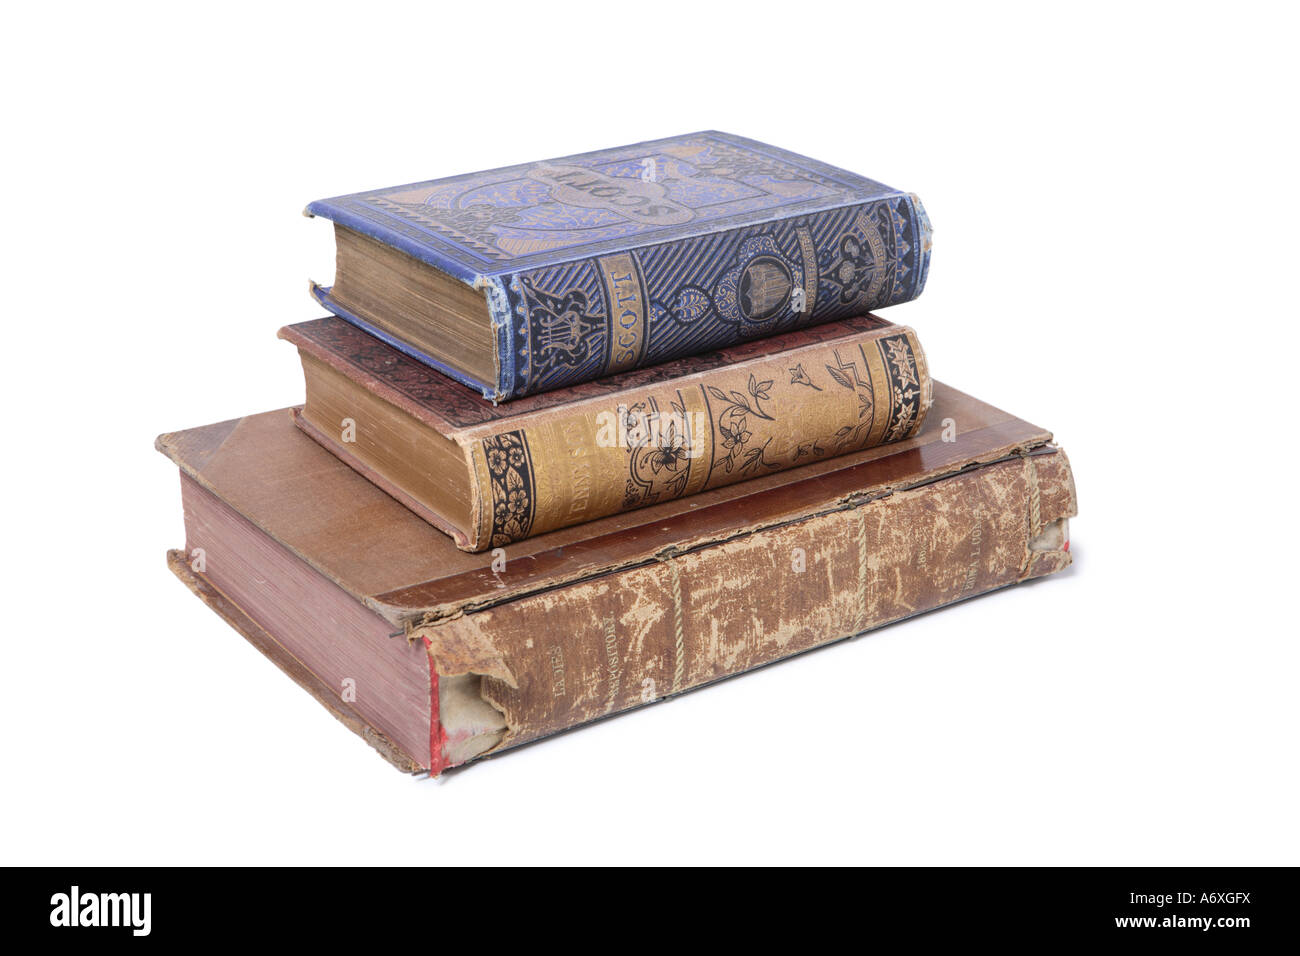 Antique books cut out on white background Stock Photo